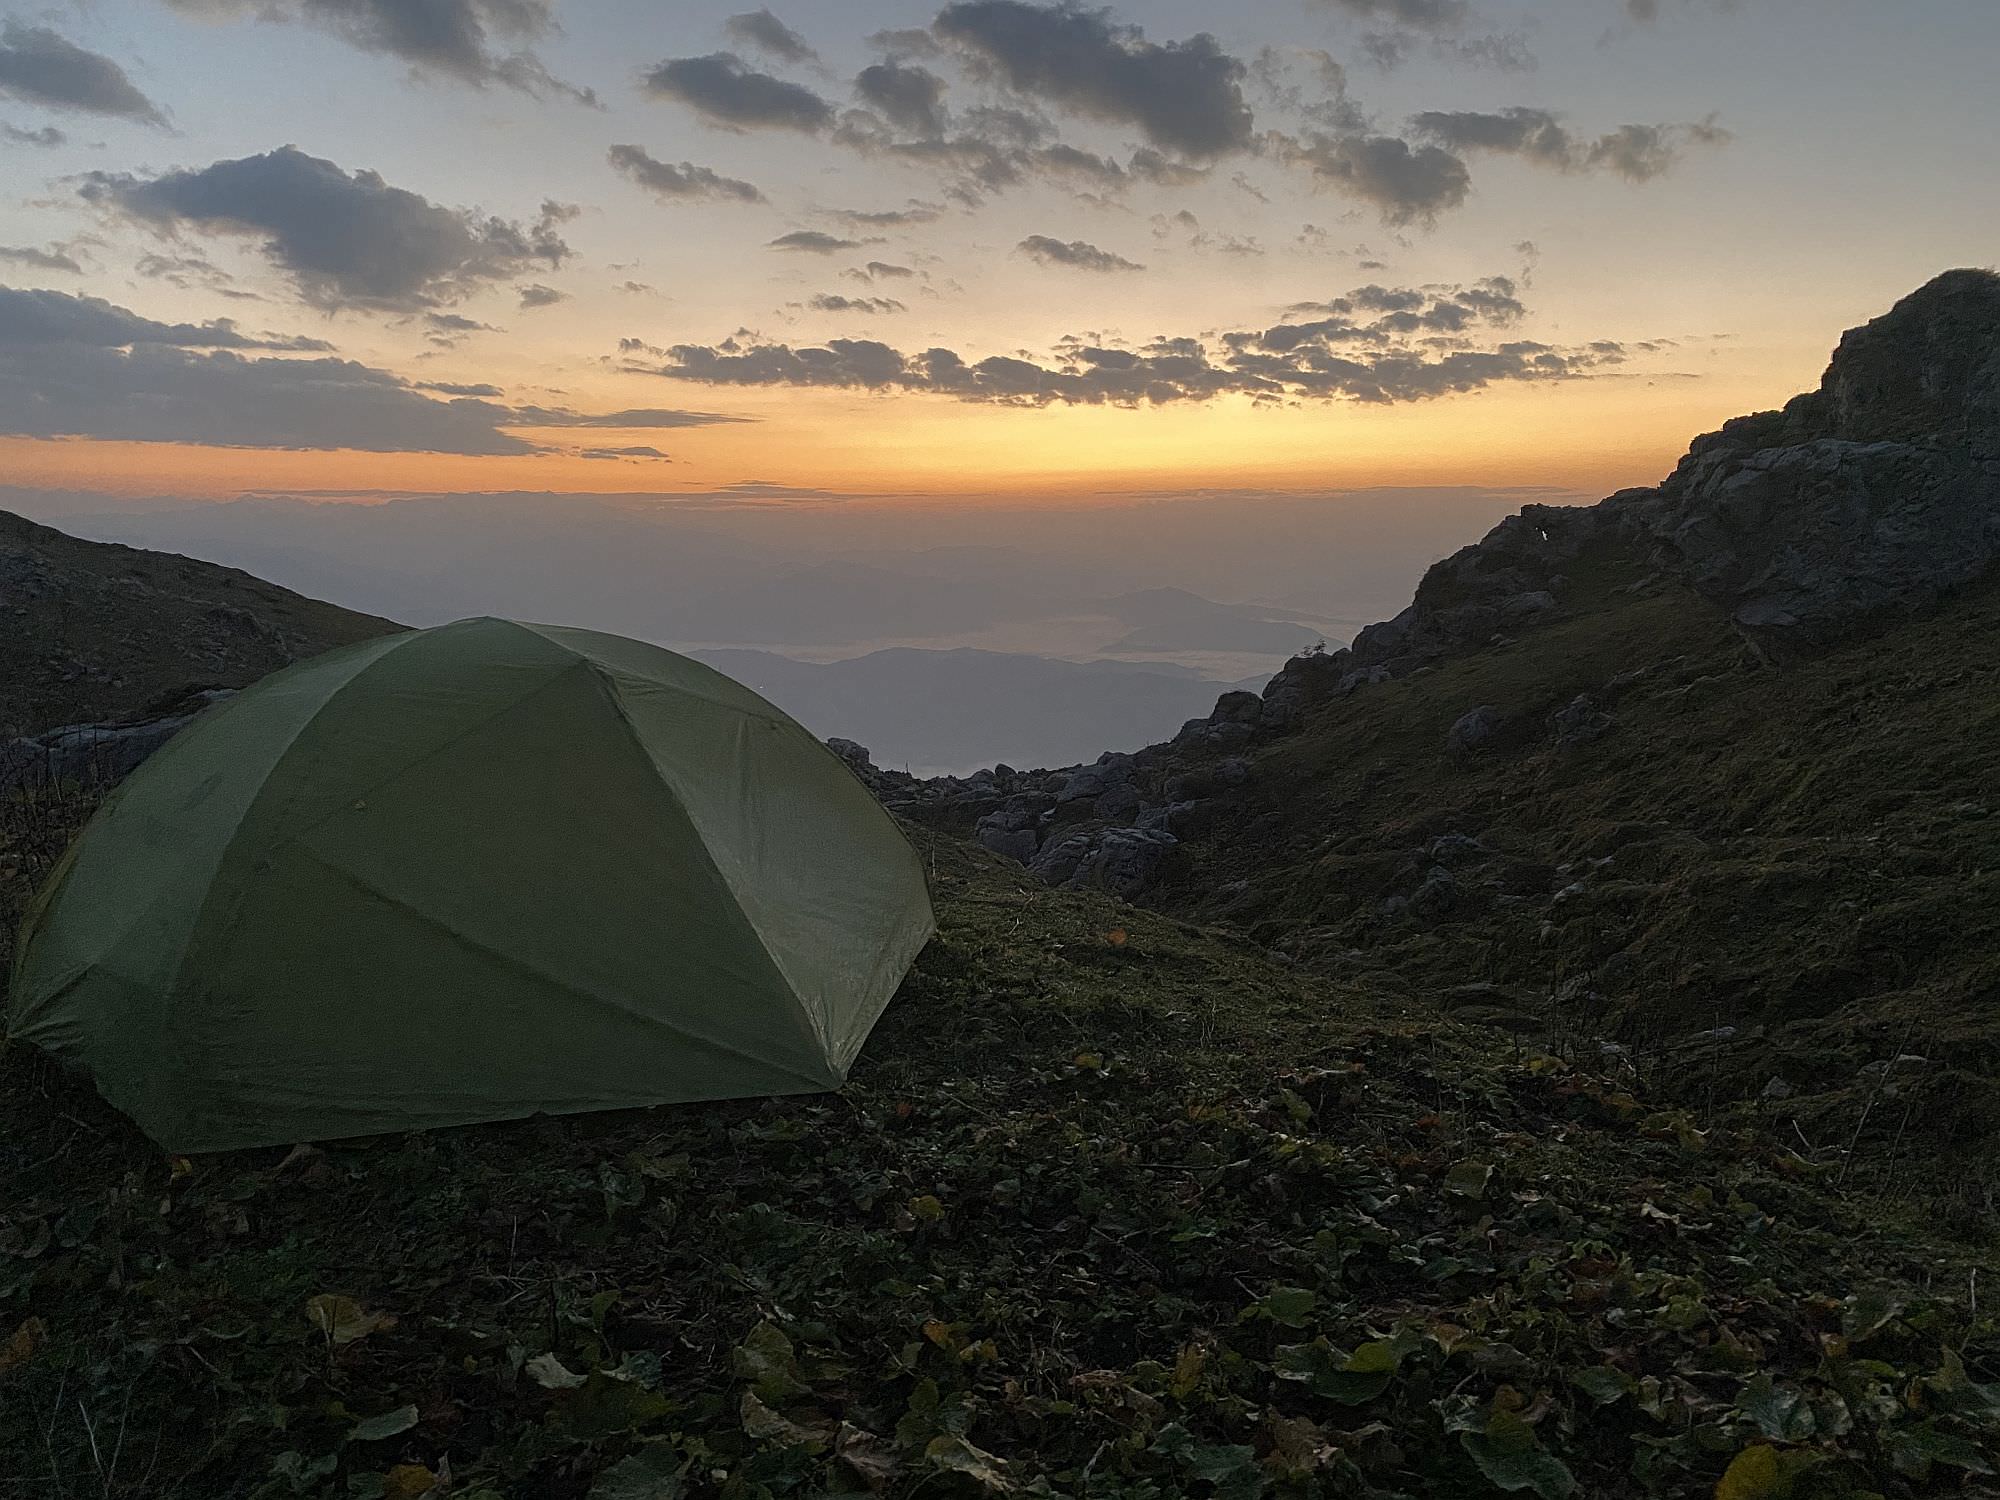 Camping on the Askhi massif